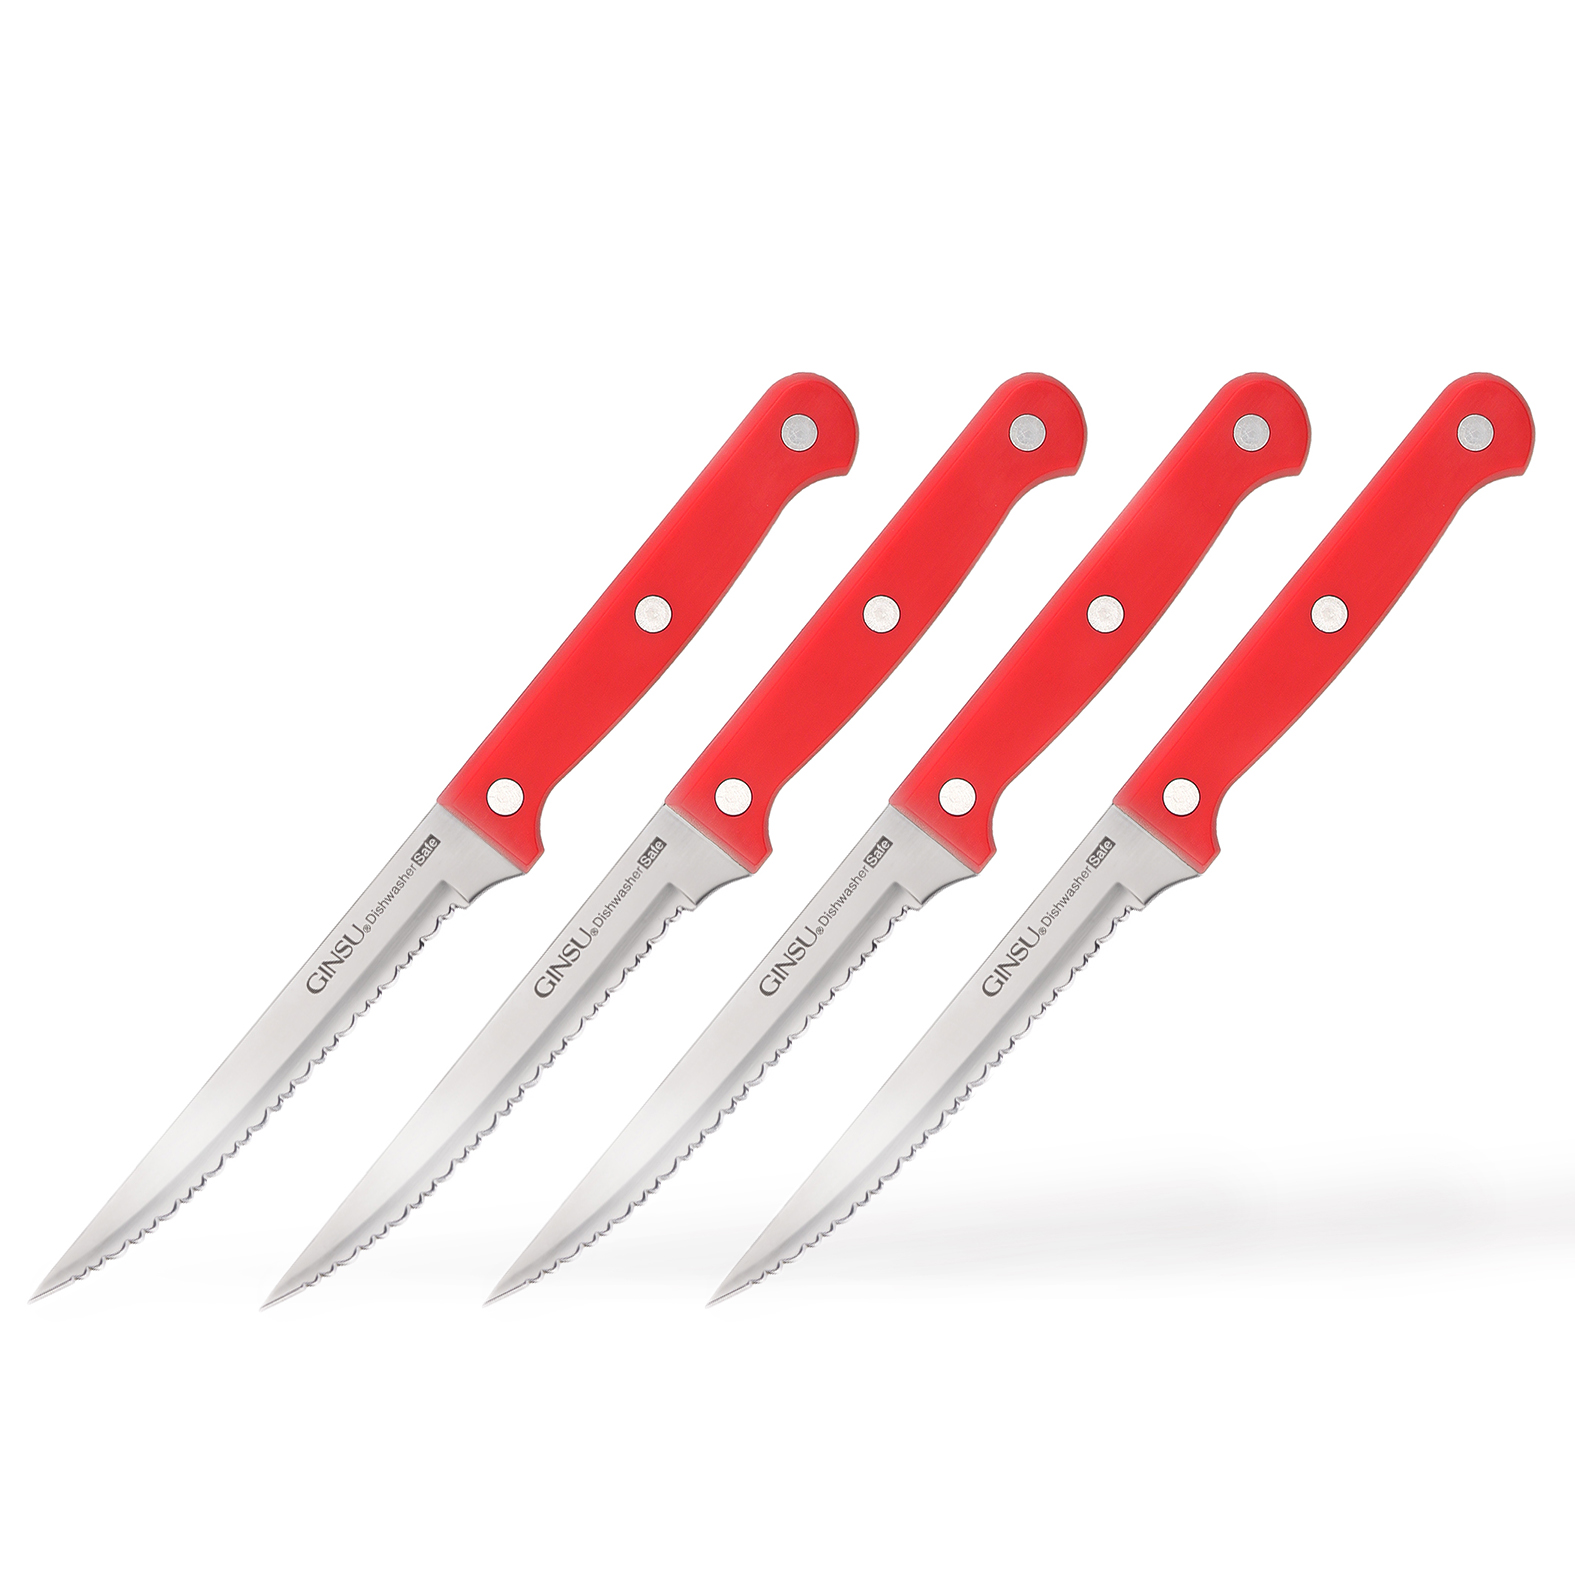 Ginsu Essential Series 14-Piece Stainless Steel Serrated Knife Set - Cutlery Set with Red Kitchen Knives in a Black Block, 03887DS - image 7 of 14